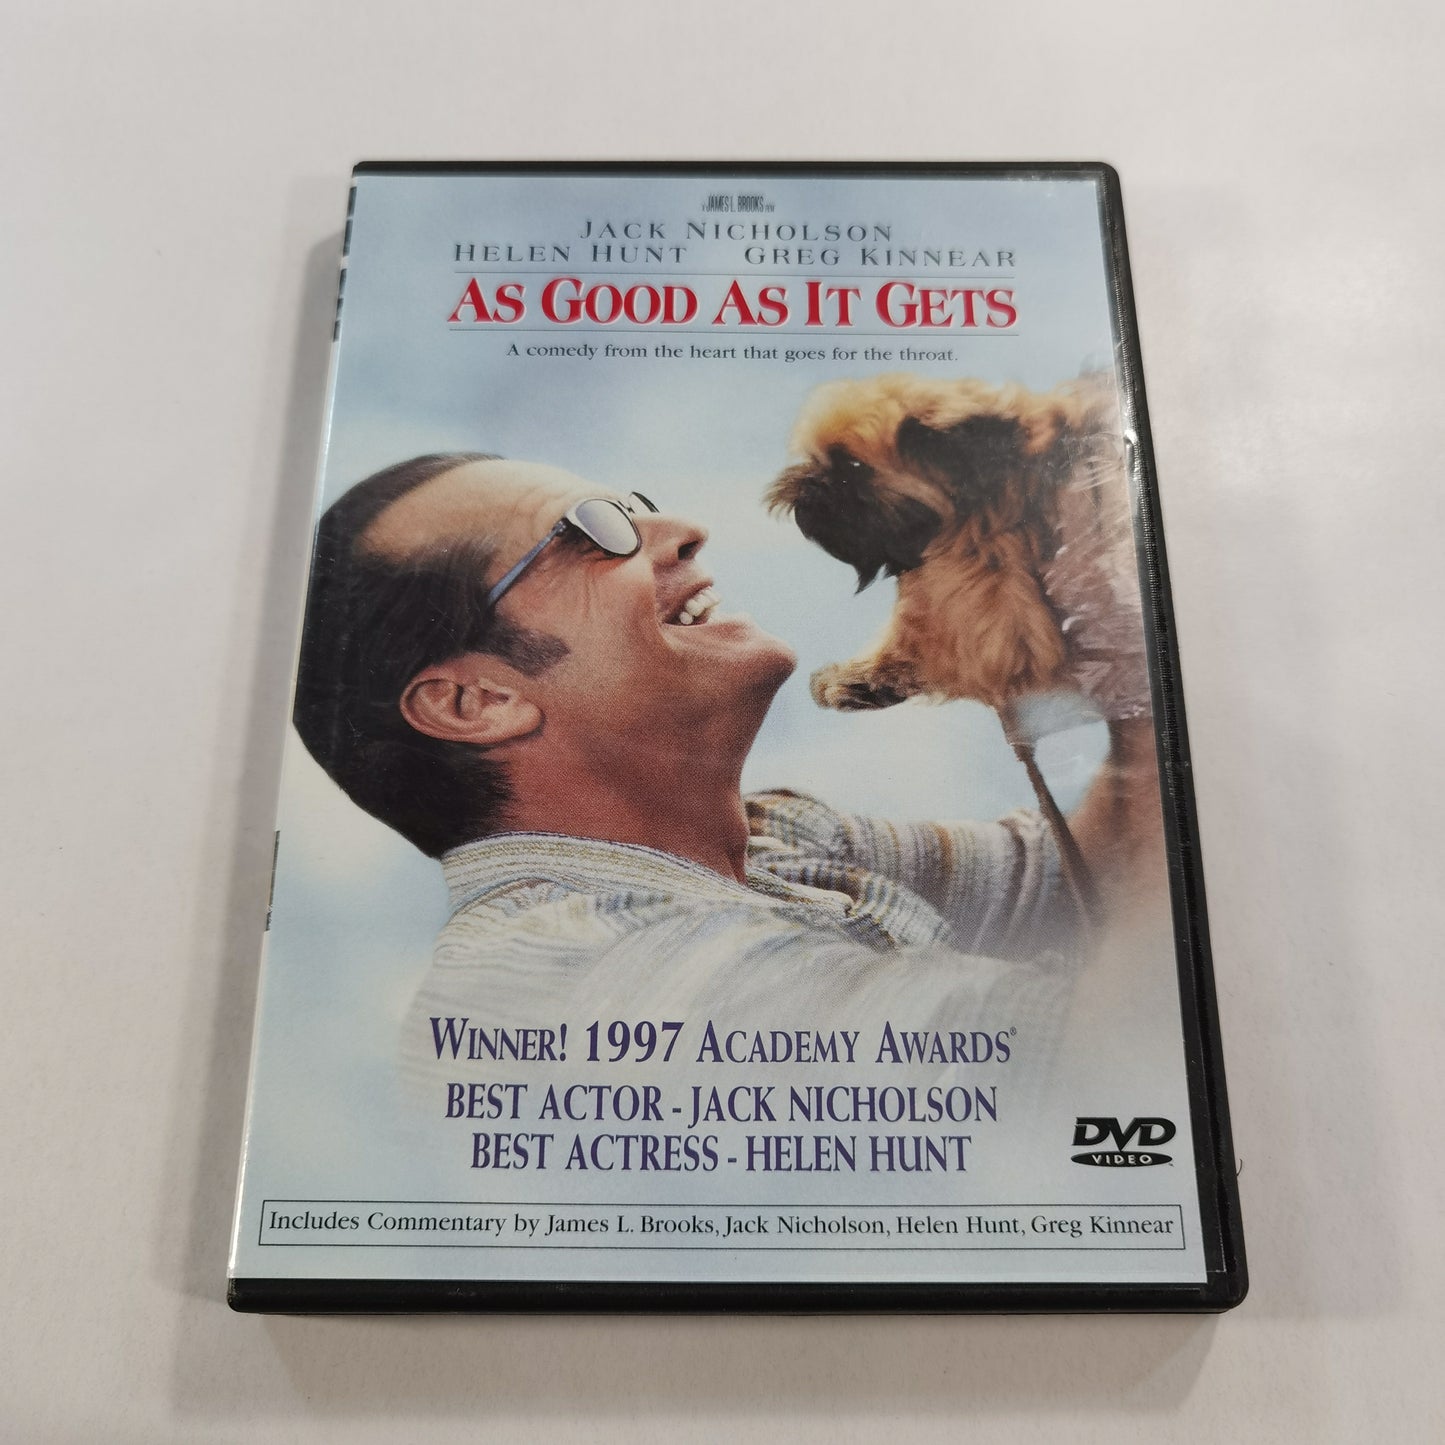 As Good As It Gets (1997) dvd movie cover